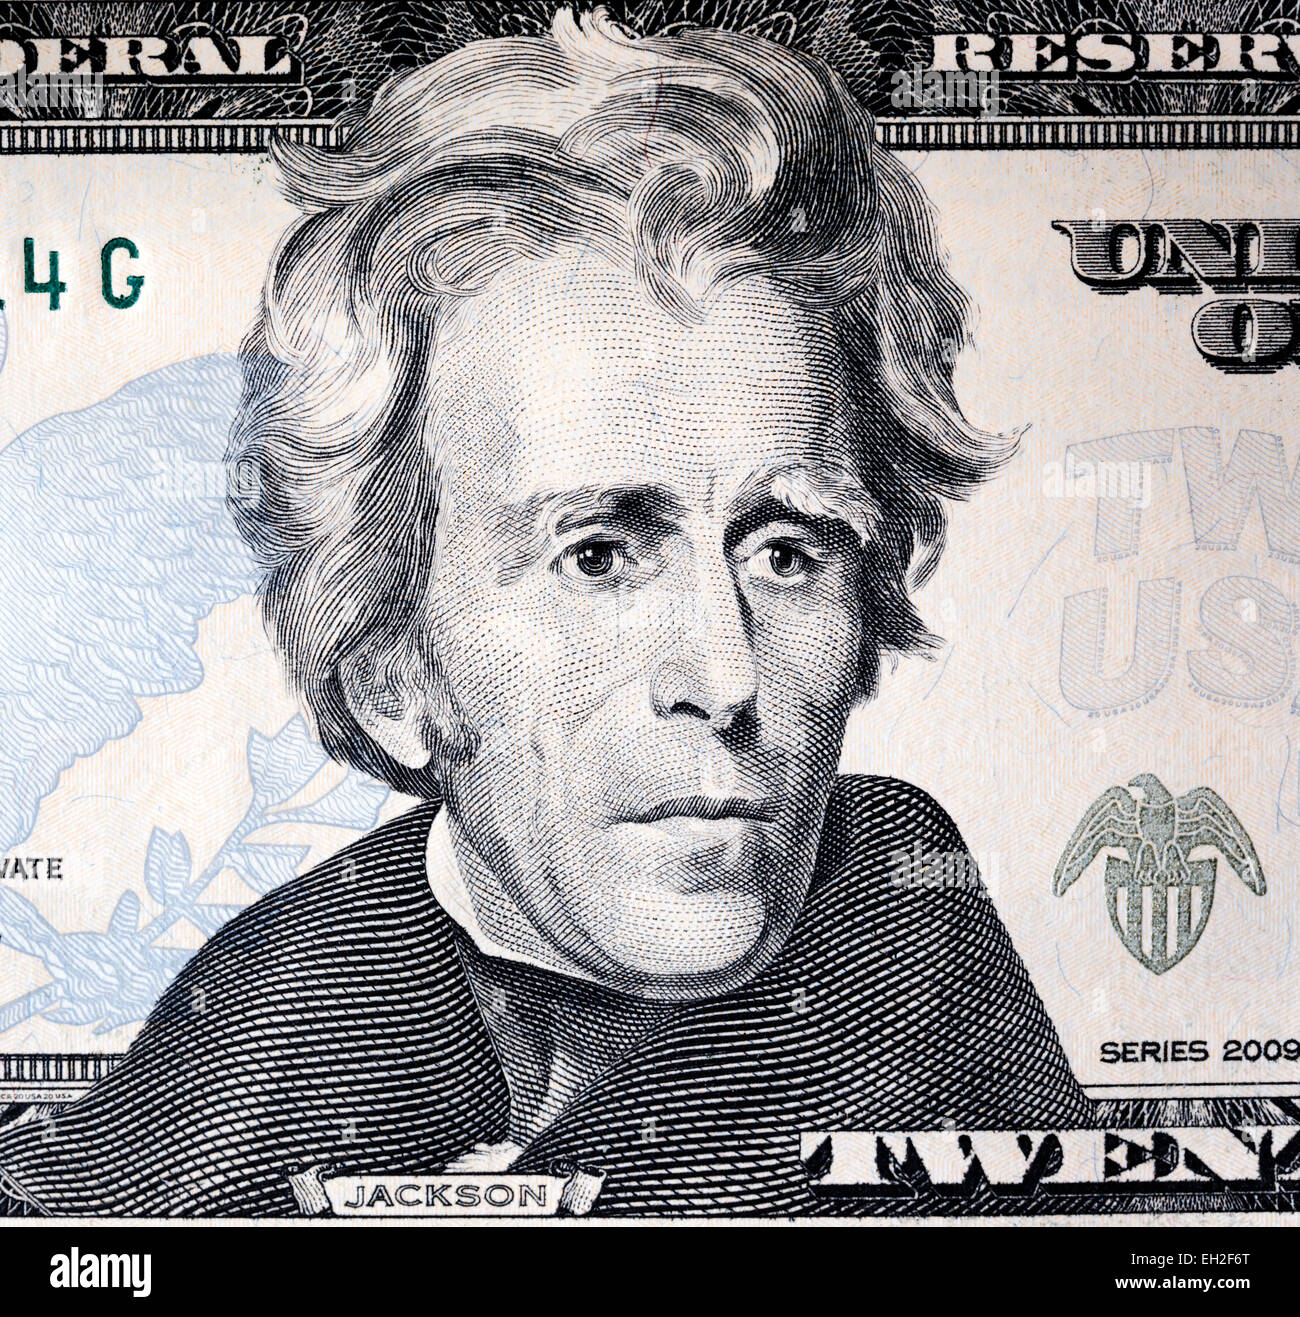 Andrew Jackson from 20 dollars banknote, USA, 2009 Stock Photo